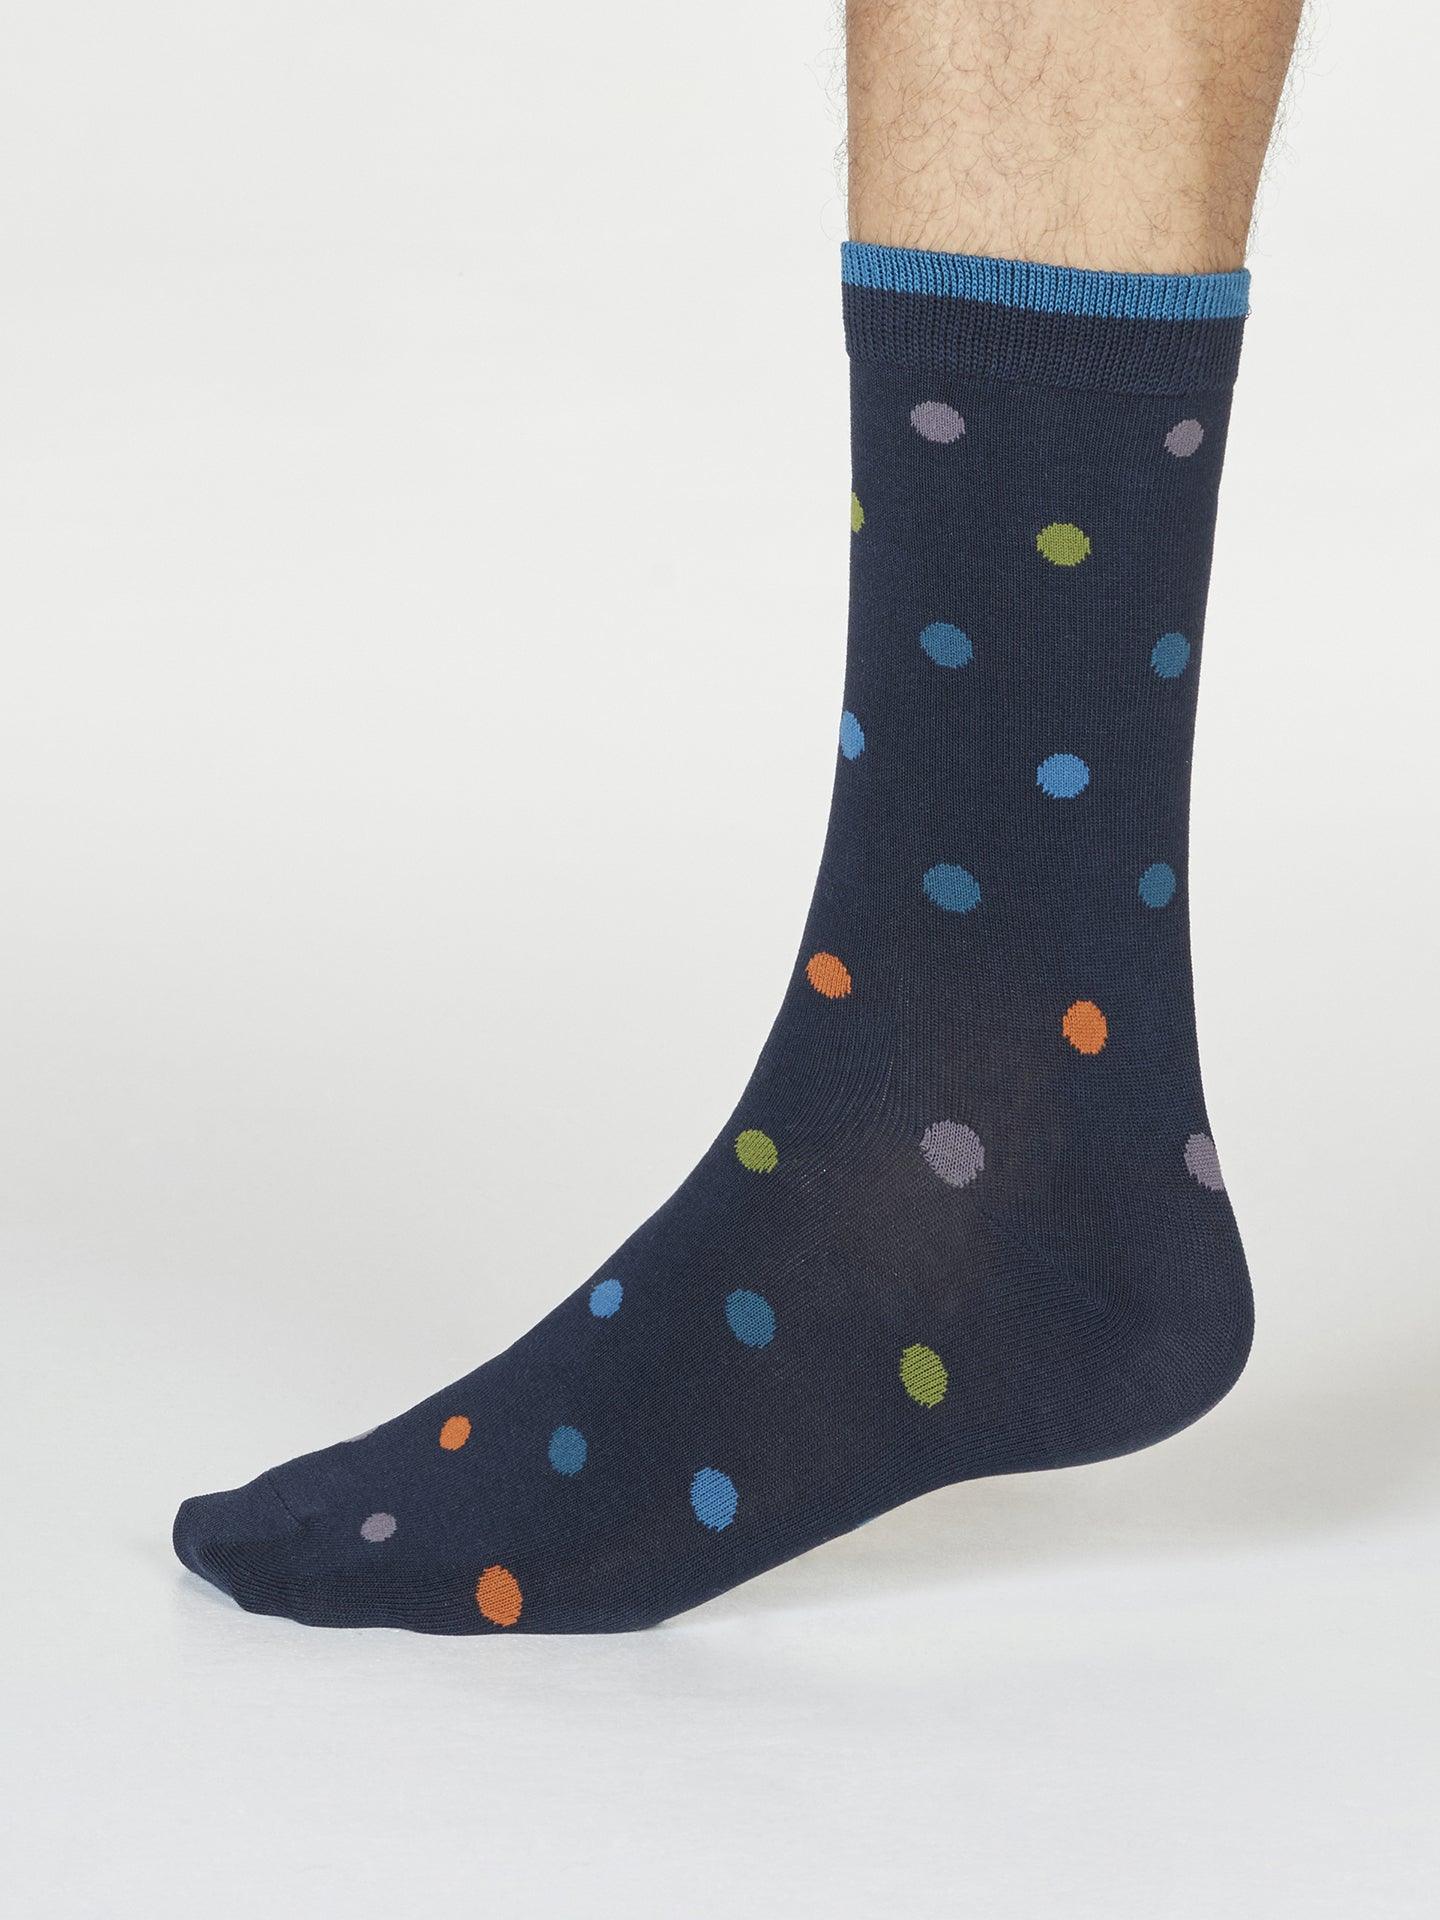 Ackley Mountain Bamboo Socks 3 Pack - Thought Clothing UK